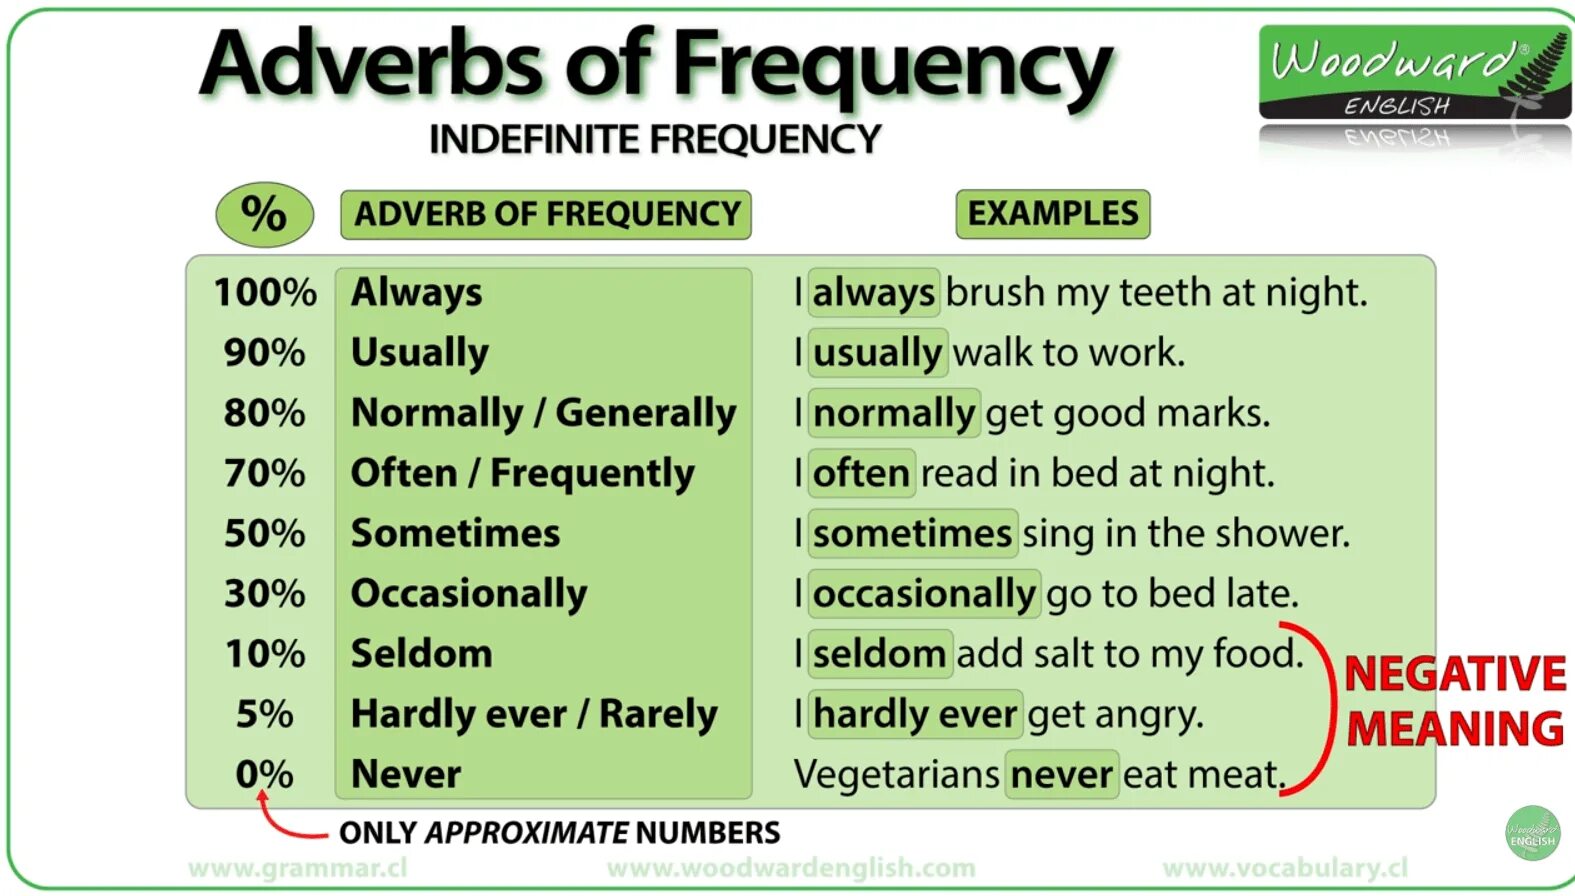 Adverbs of Frequency. Adverbs of Frequency in English. Adverbs and expressions of Frequency правило. Frequency adverbs грамматика. Next grammar